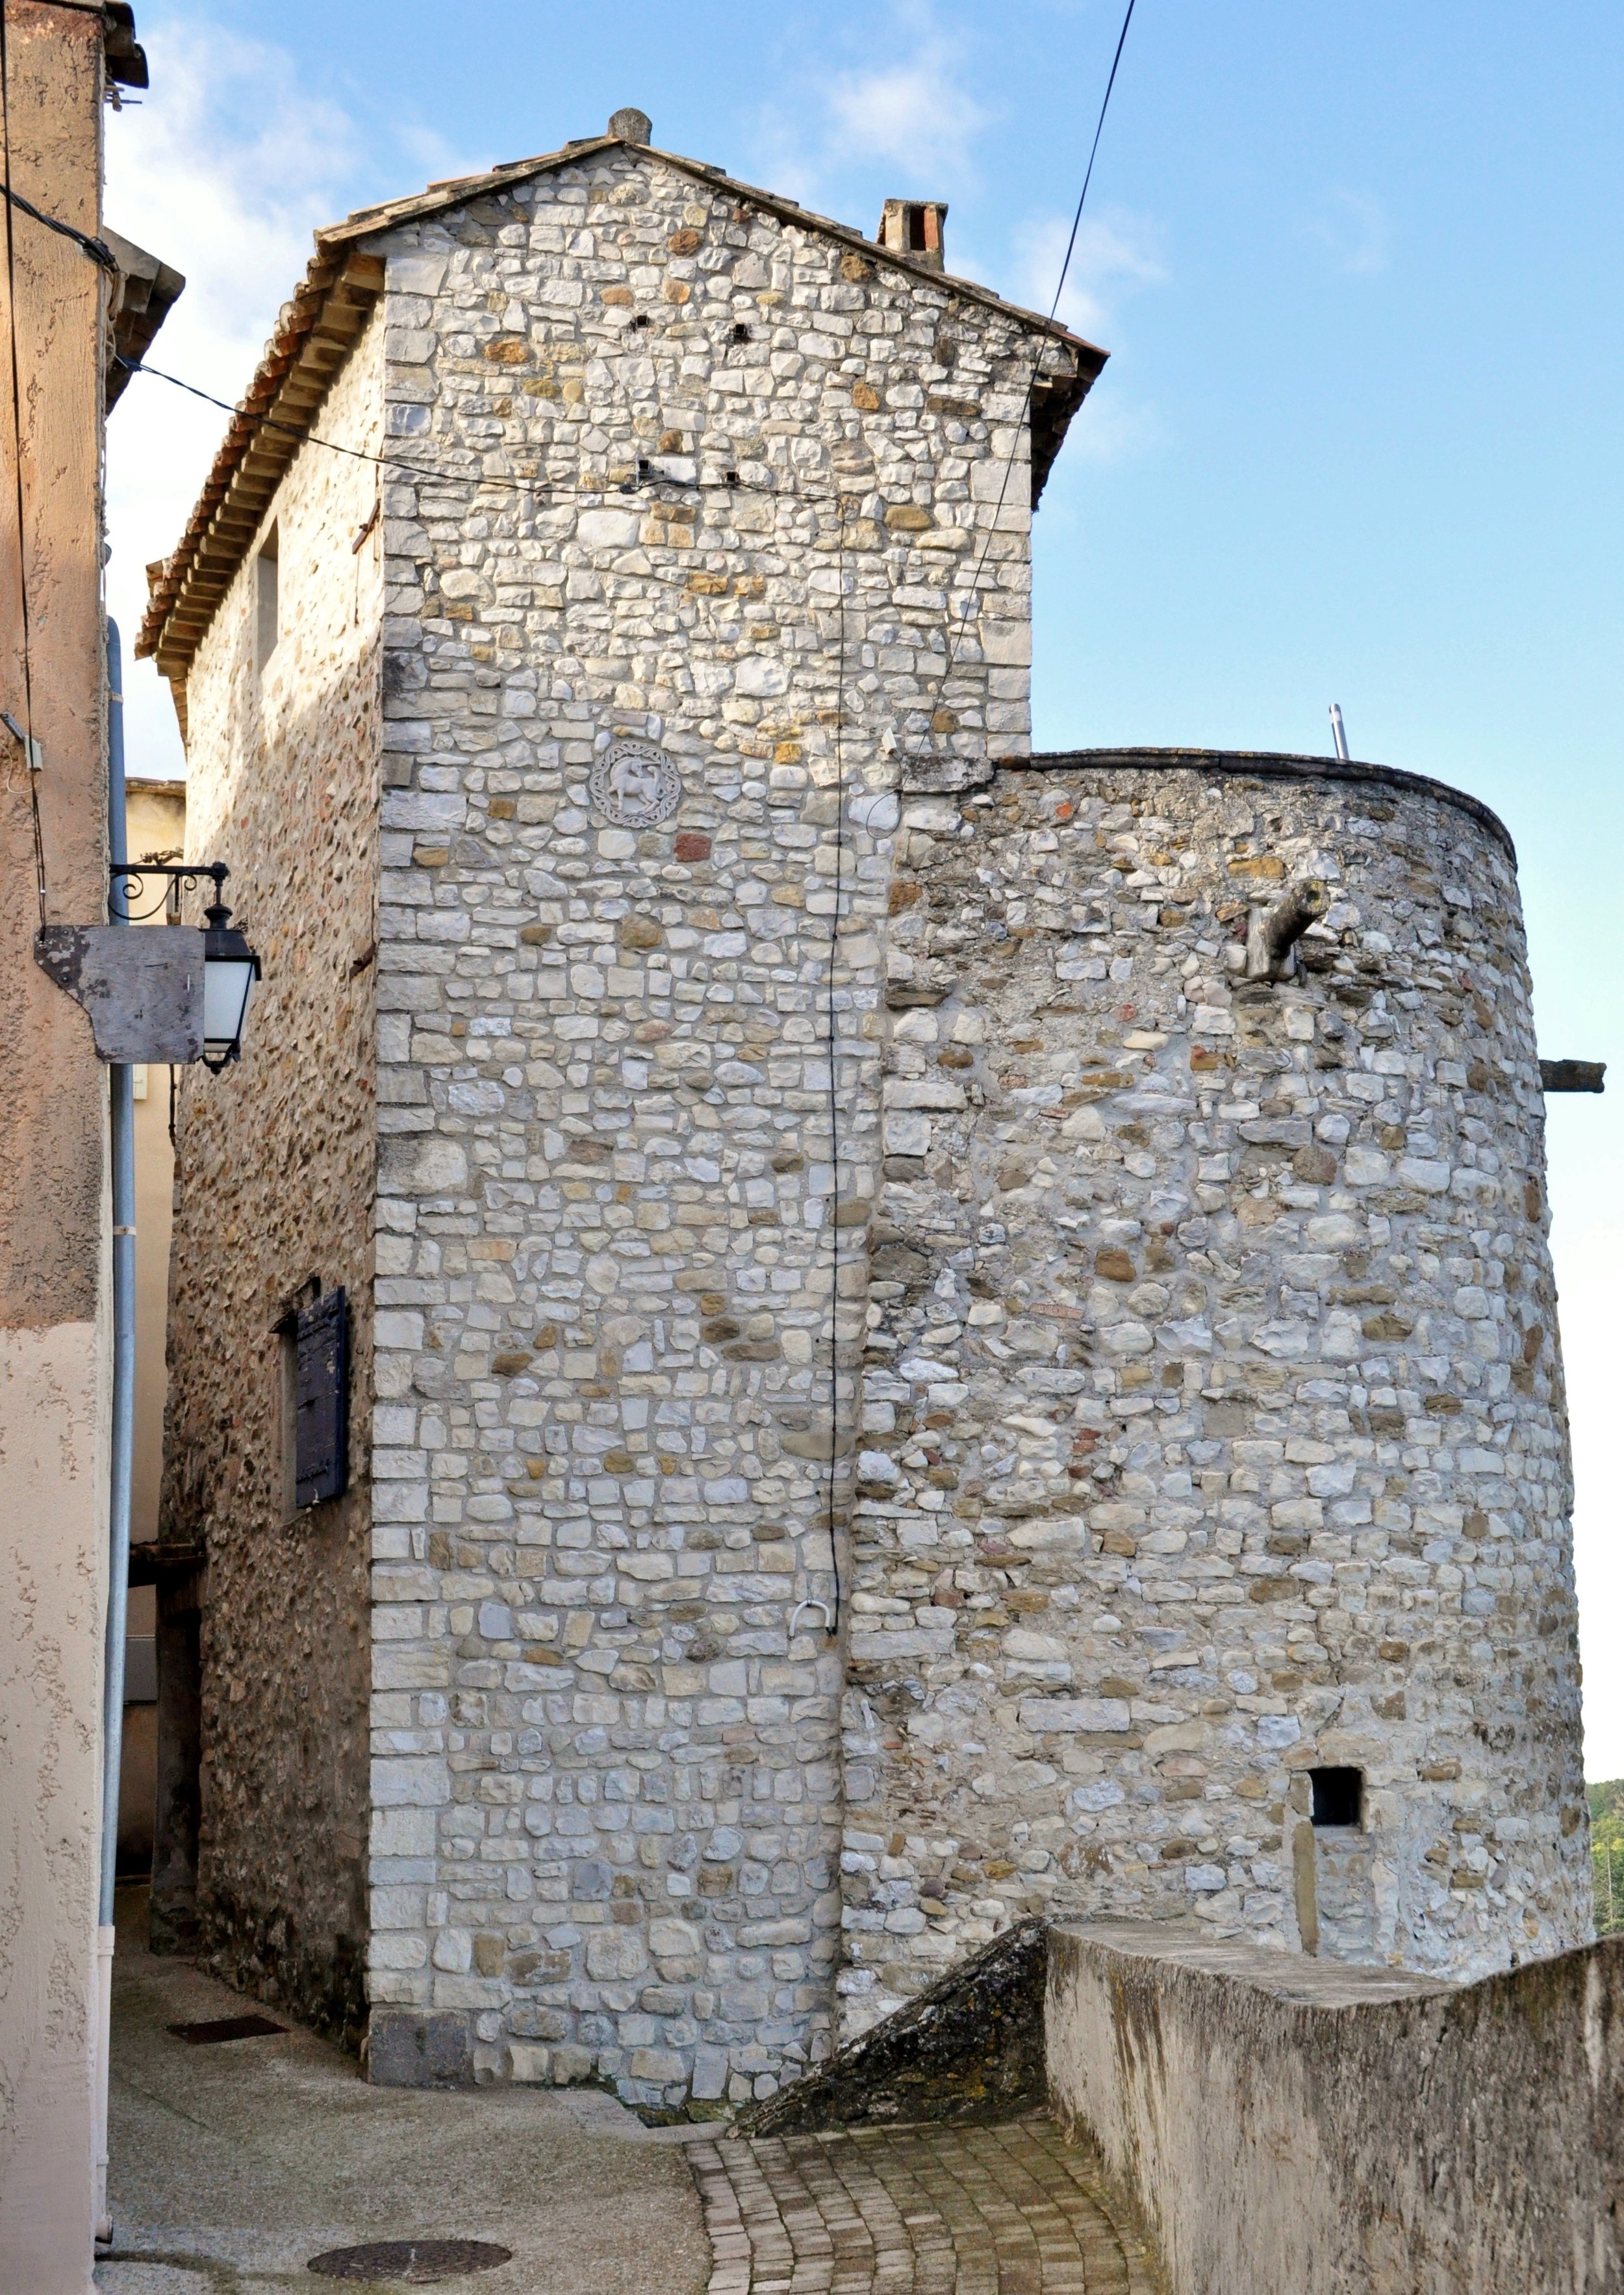 One of the towers that are part of the historical defensive wall.